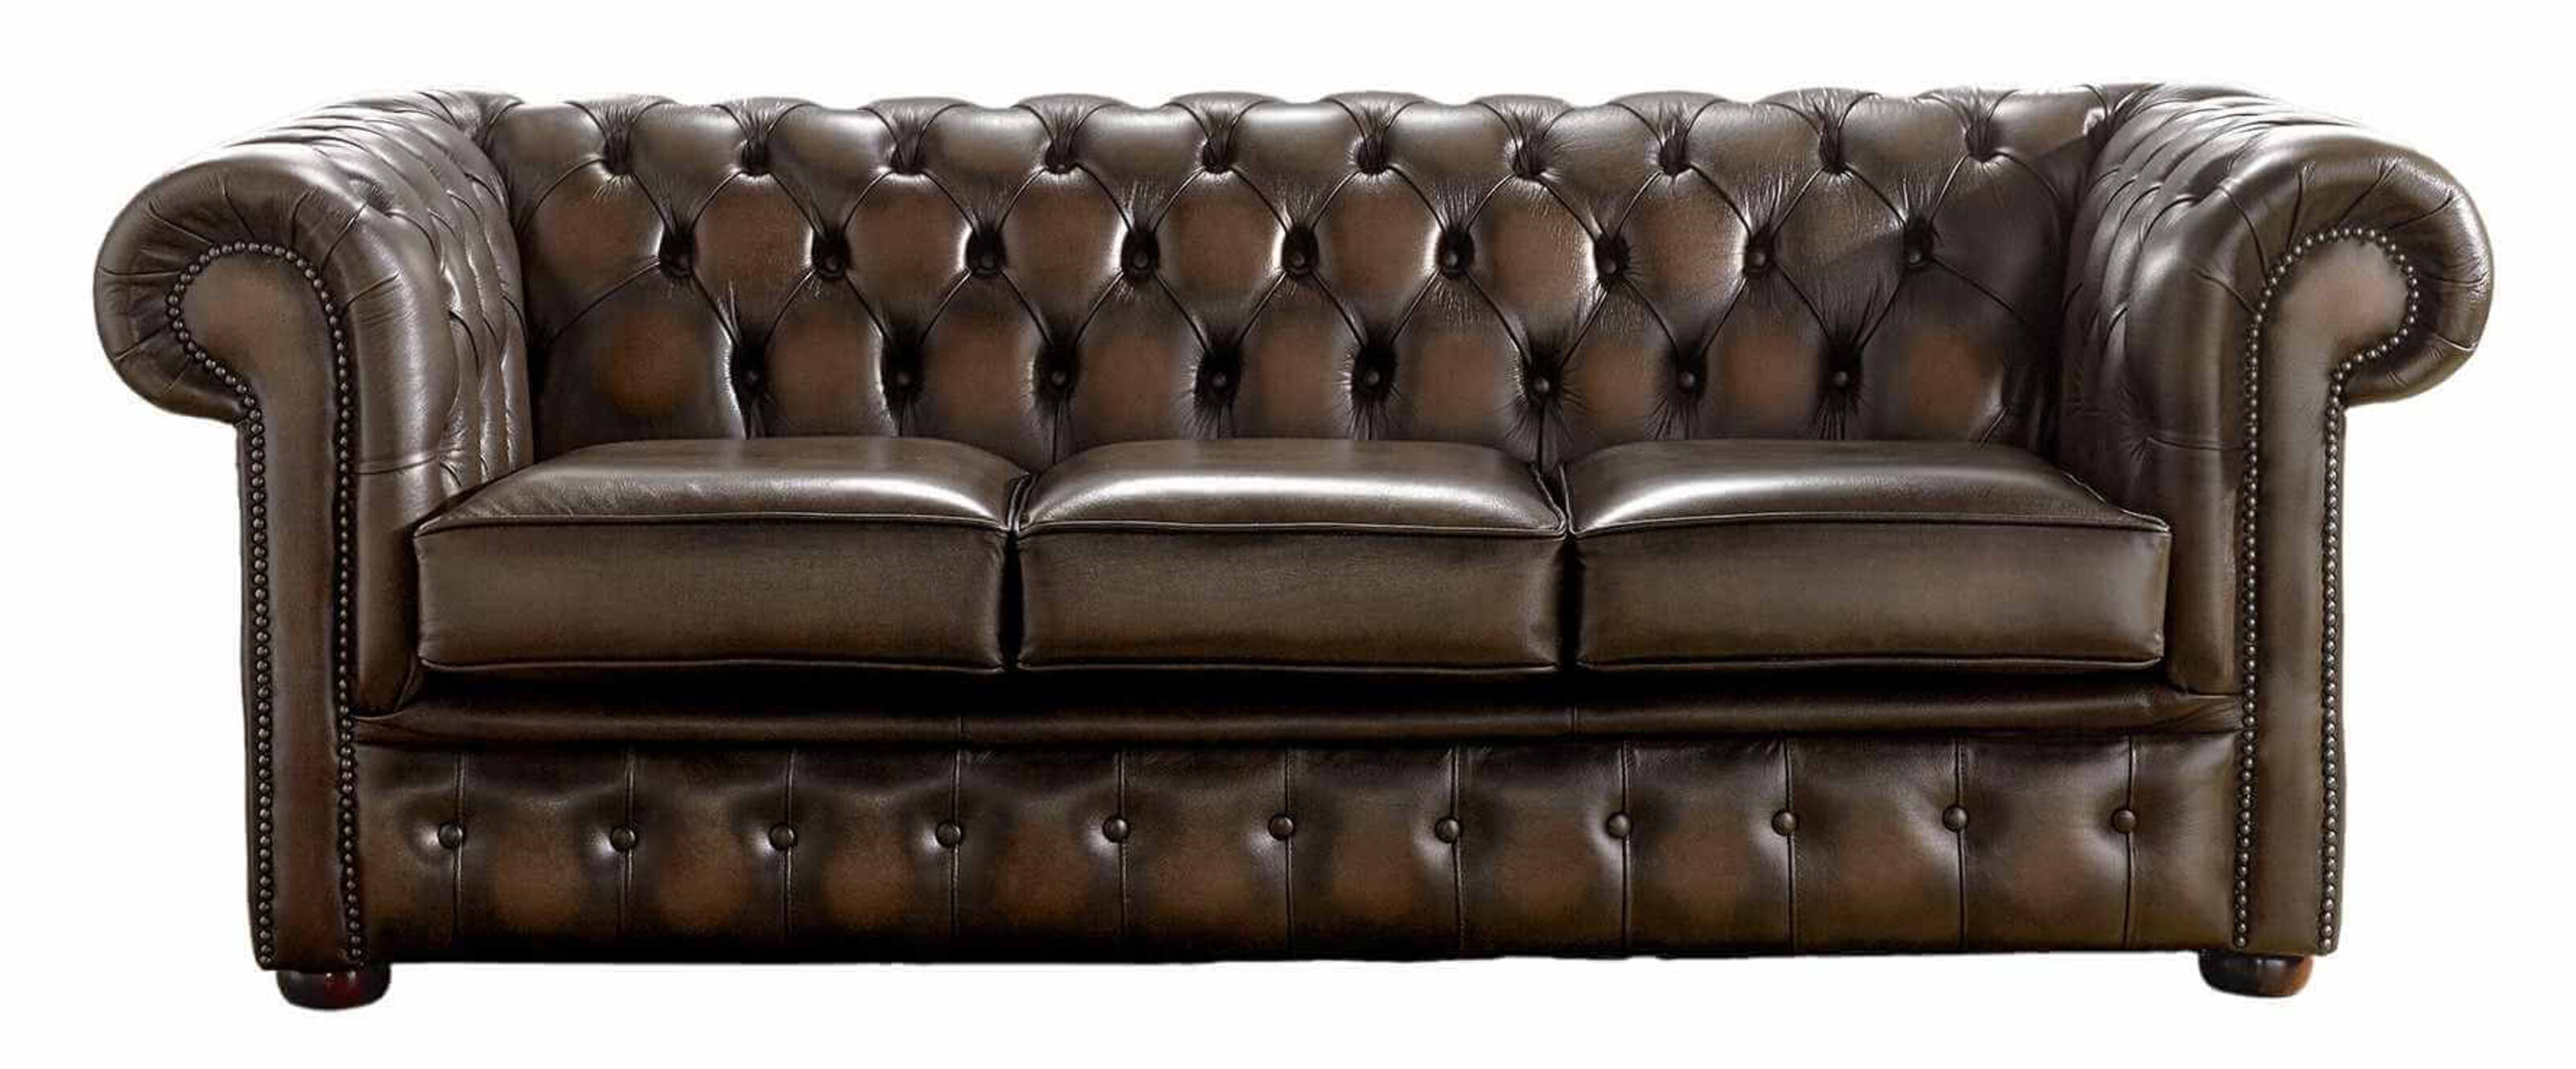 Timeless Elegance Reconsidering the Style of Chesterfield Sofas  %Post Title